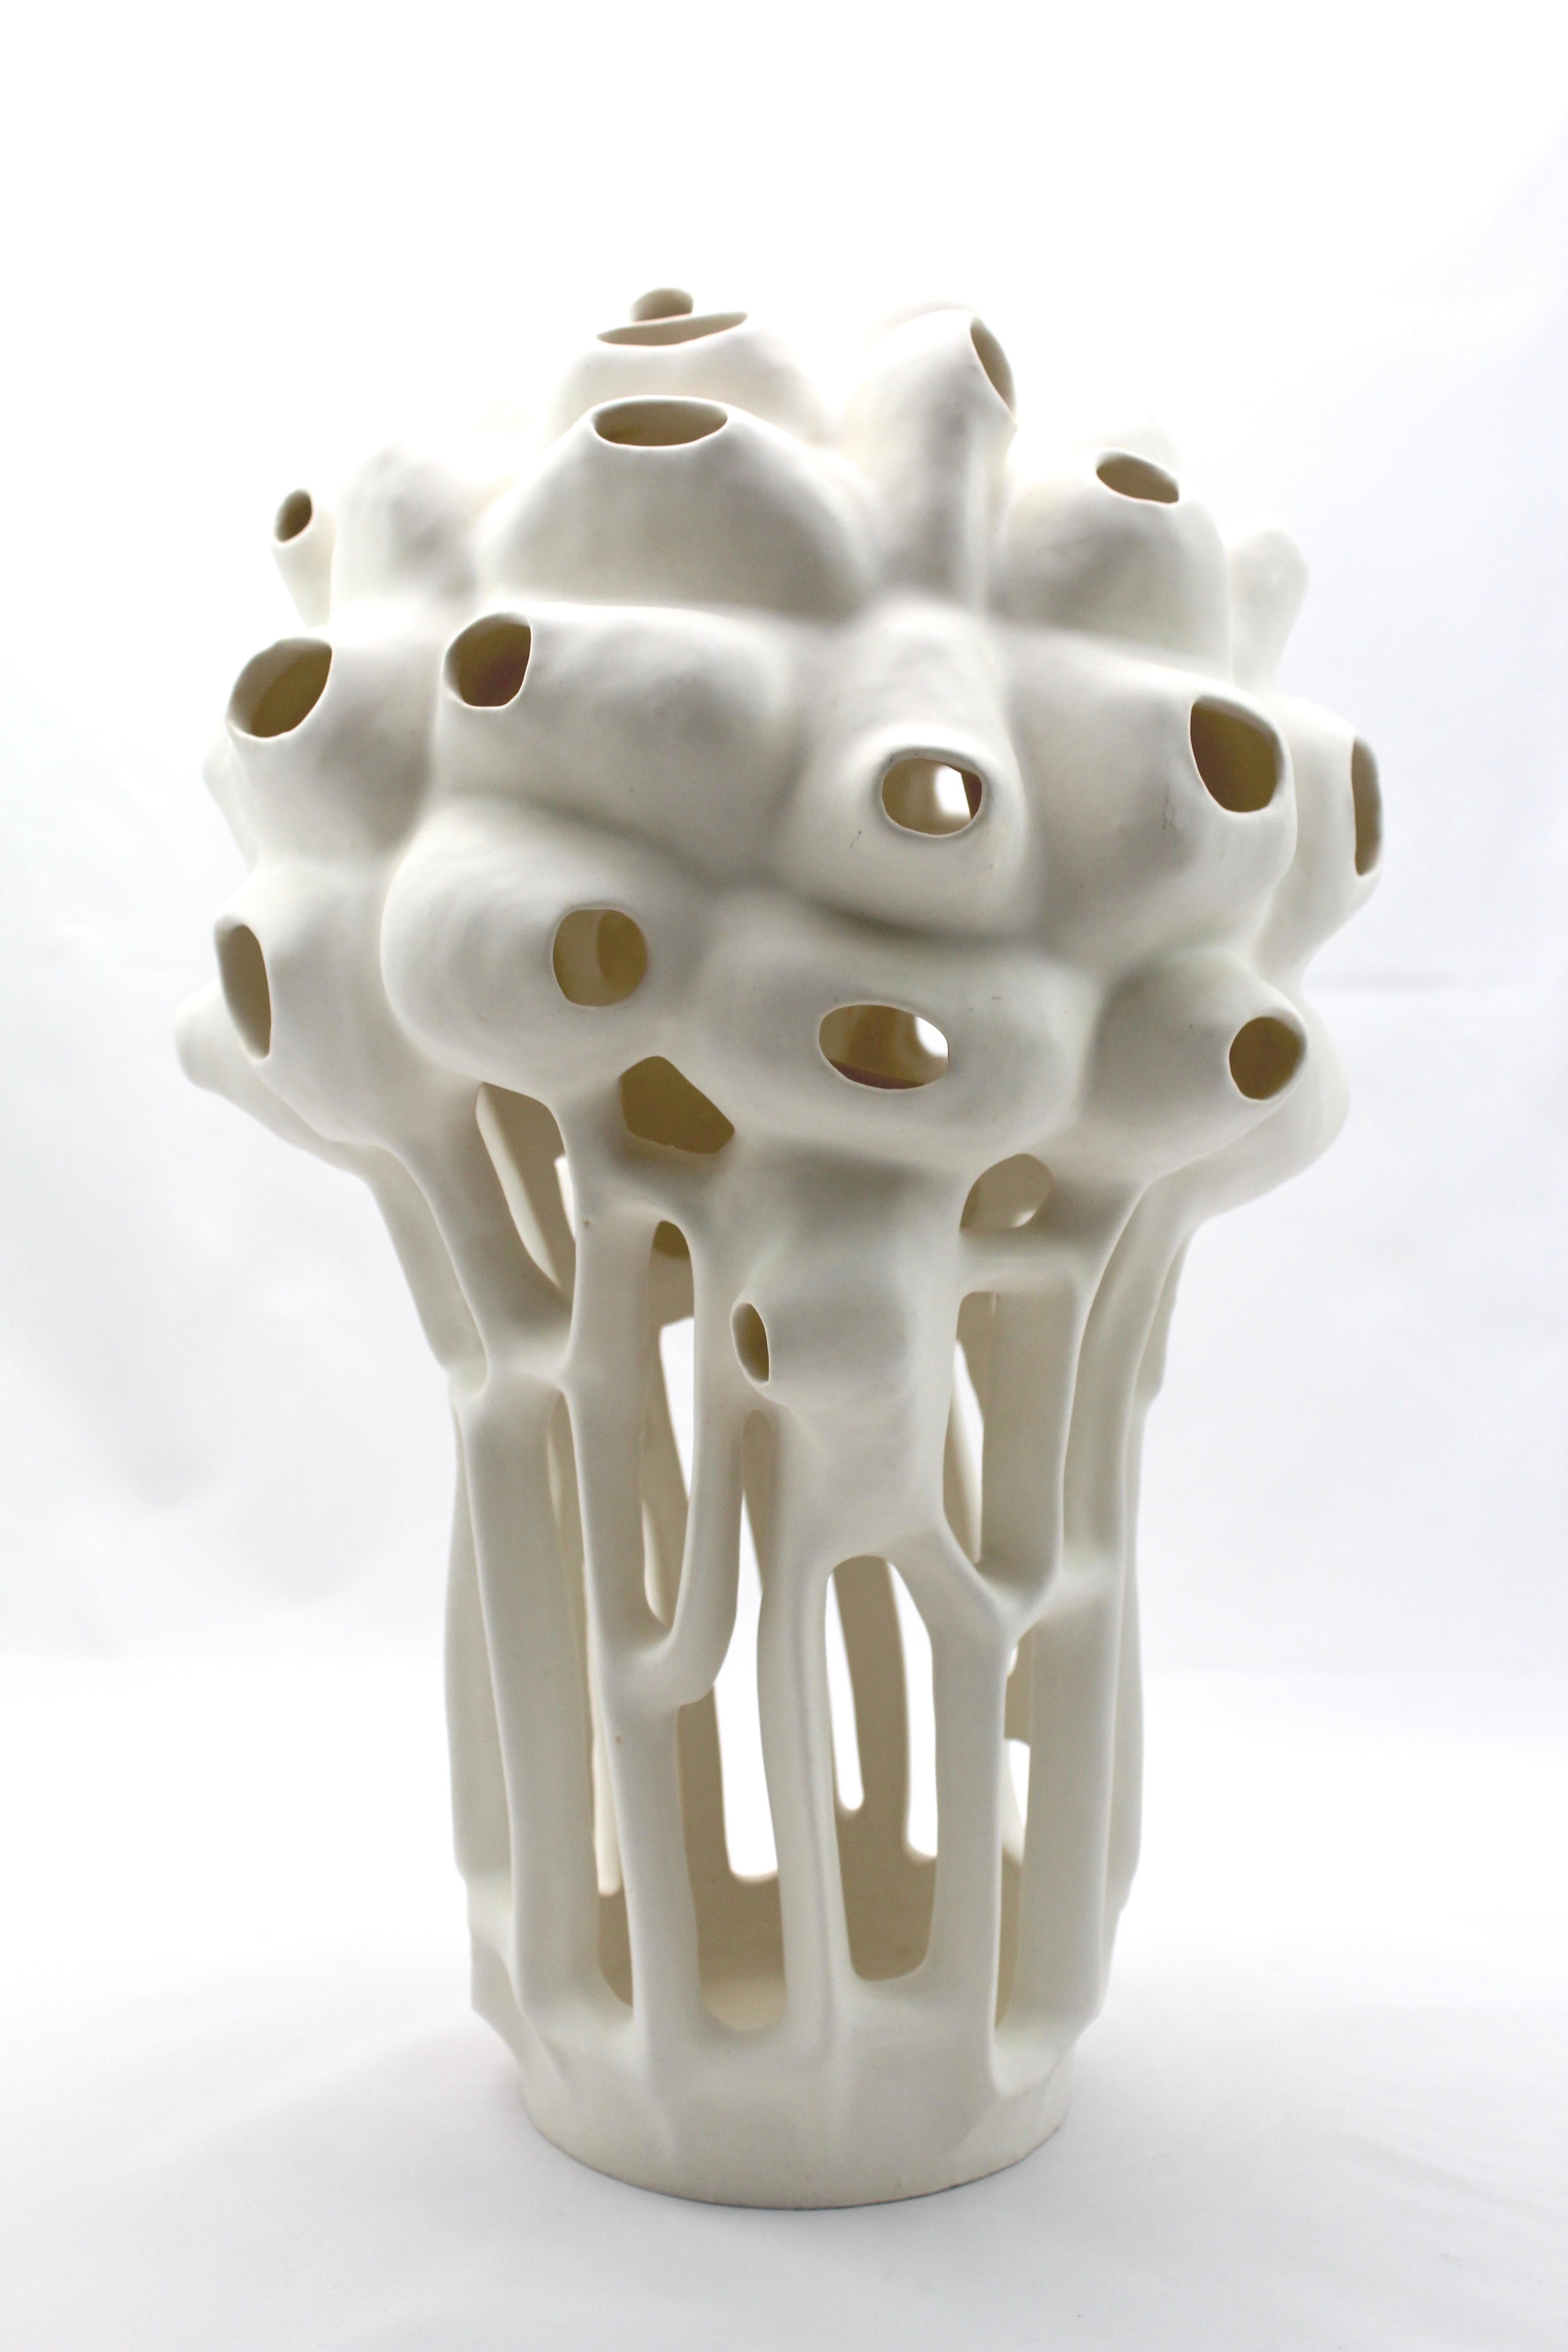 Joan Lurie Abstract Sculpture - Untitled #6 - abstract geometric, organic white glazed porcelain sculpture 